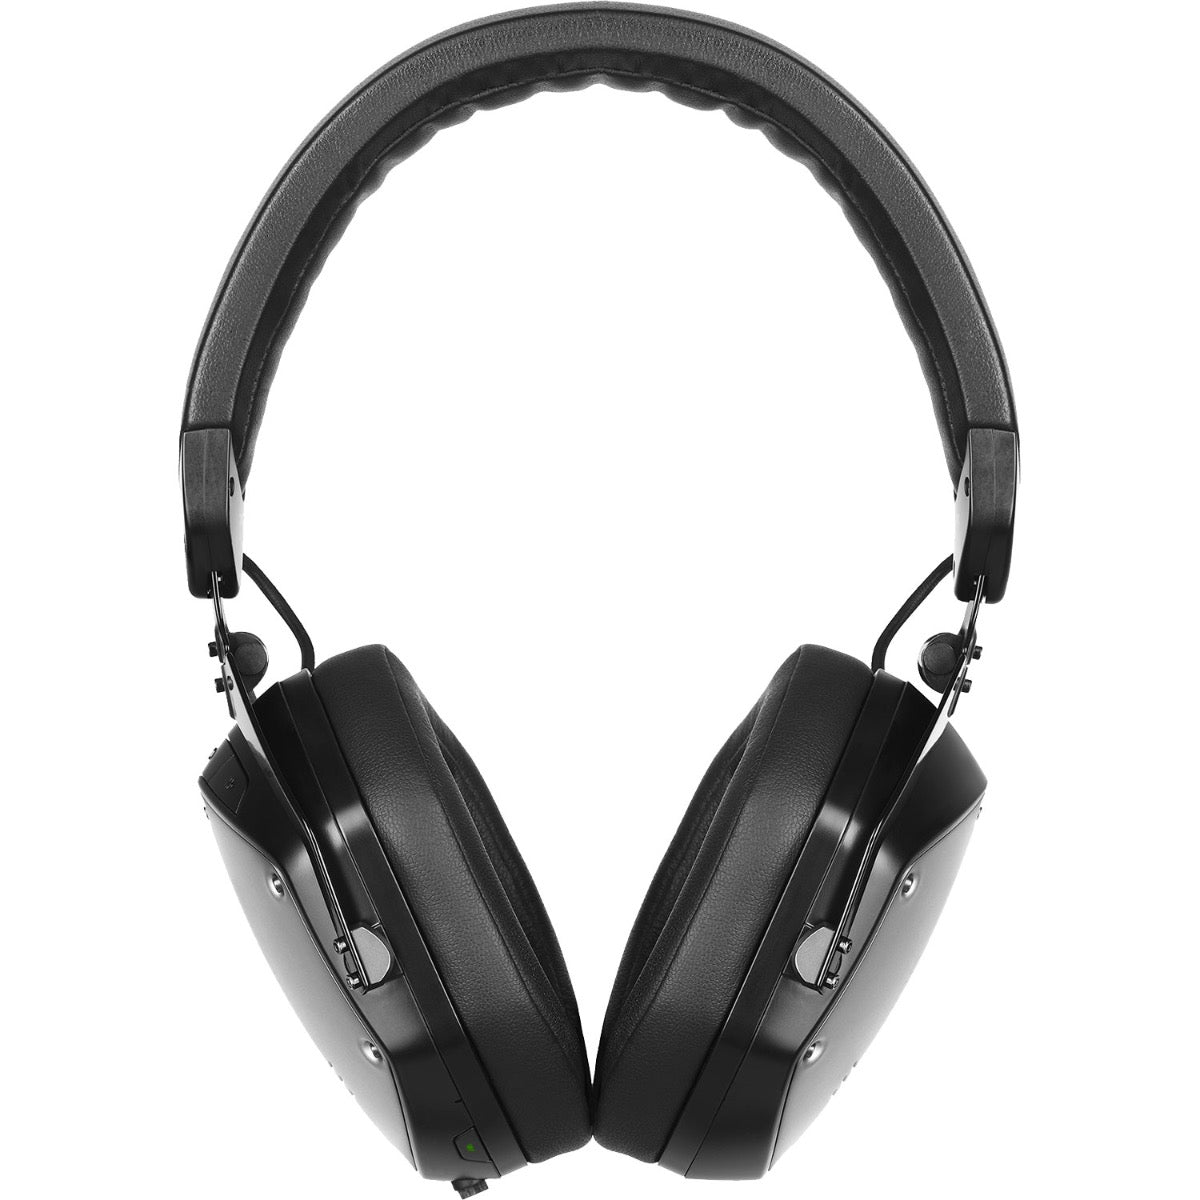 Front view of V-Moda M-200 ANC Noise Cancelling Wireless Bluetooth Headphones - Black